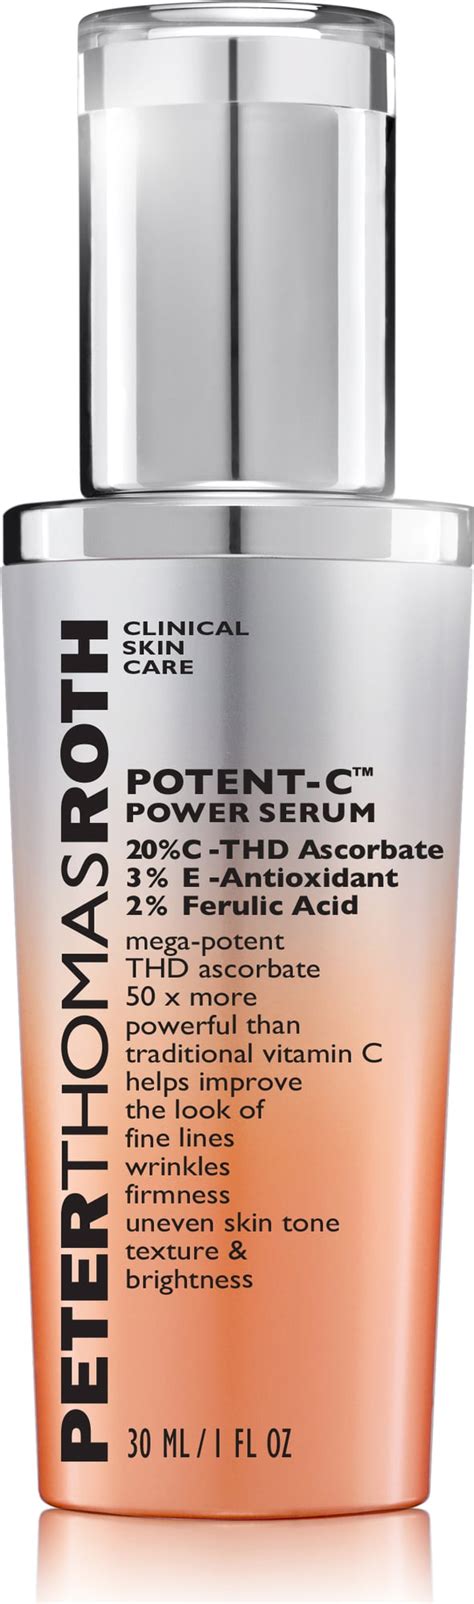 Peter thomas roth firmx peeling gel exfoliant 6.8oz as pictured limited edition. Peter Thomas Roth Potent-C Power Serum, 30 ml - Cosmeterie ...